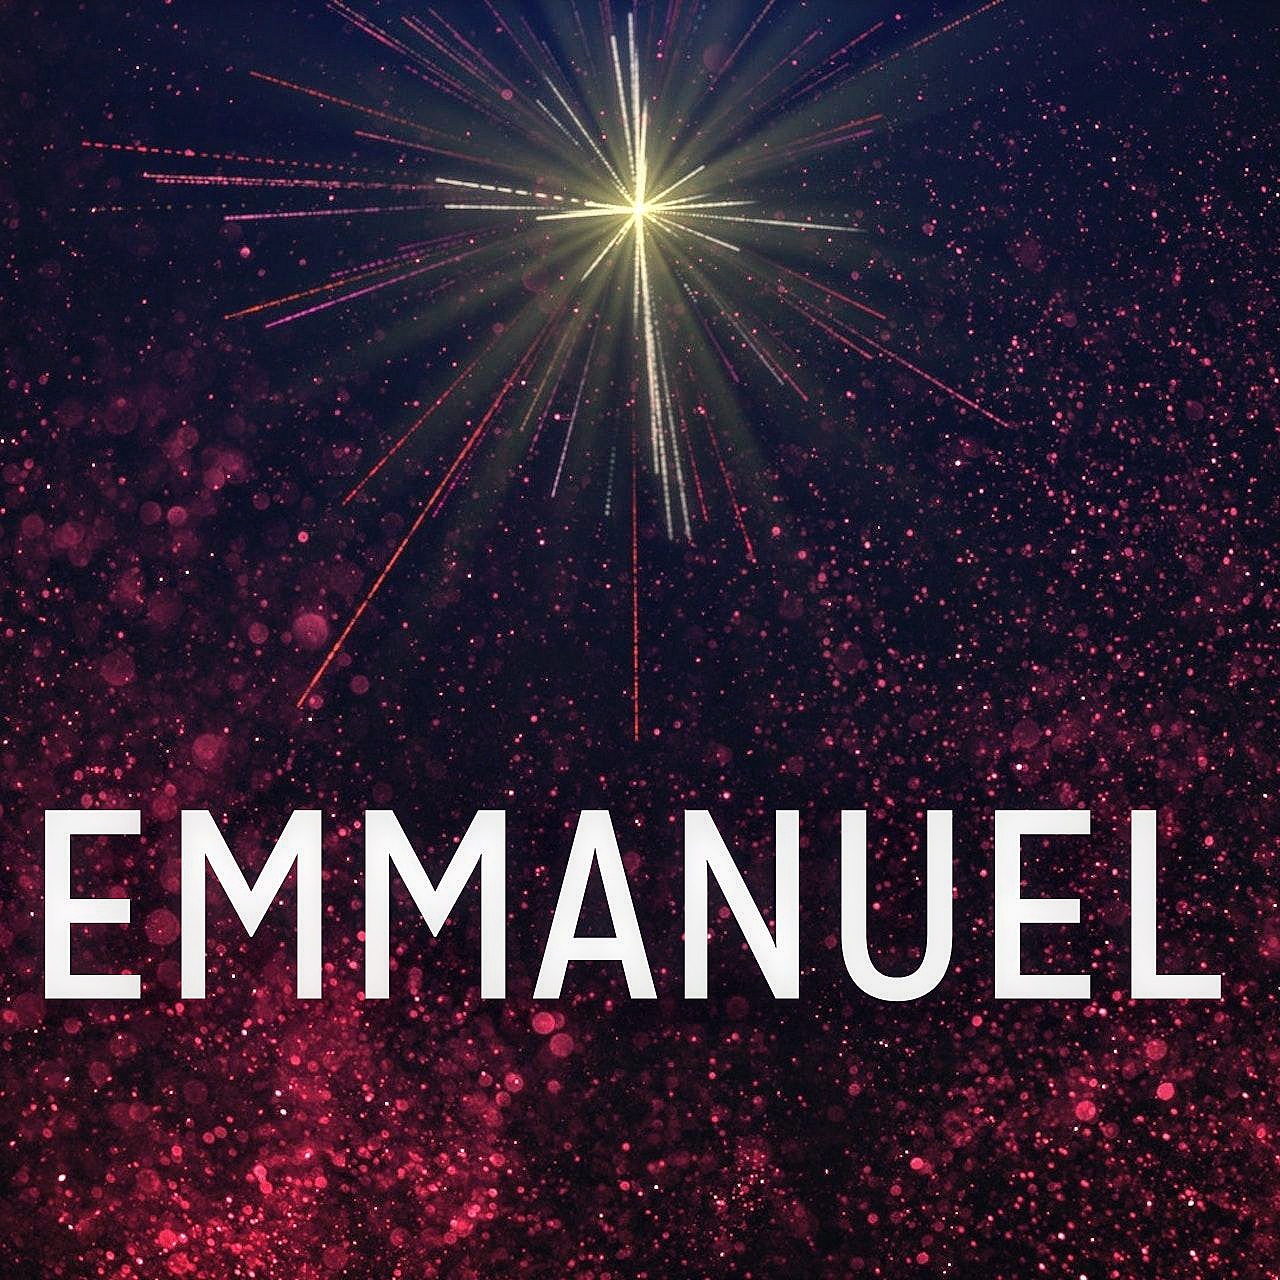 And His Name Shall Be Called: Emmanuel